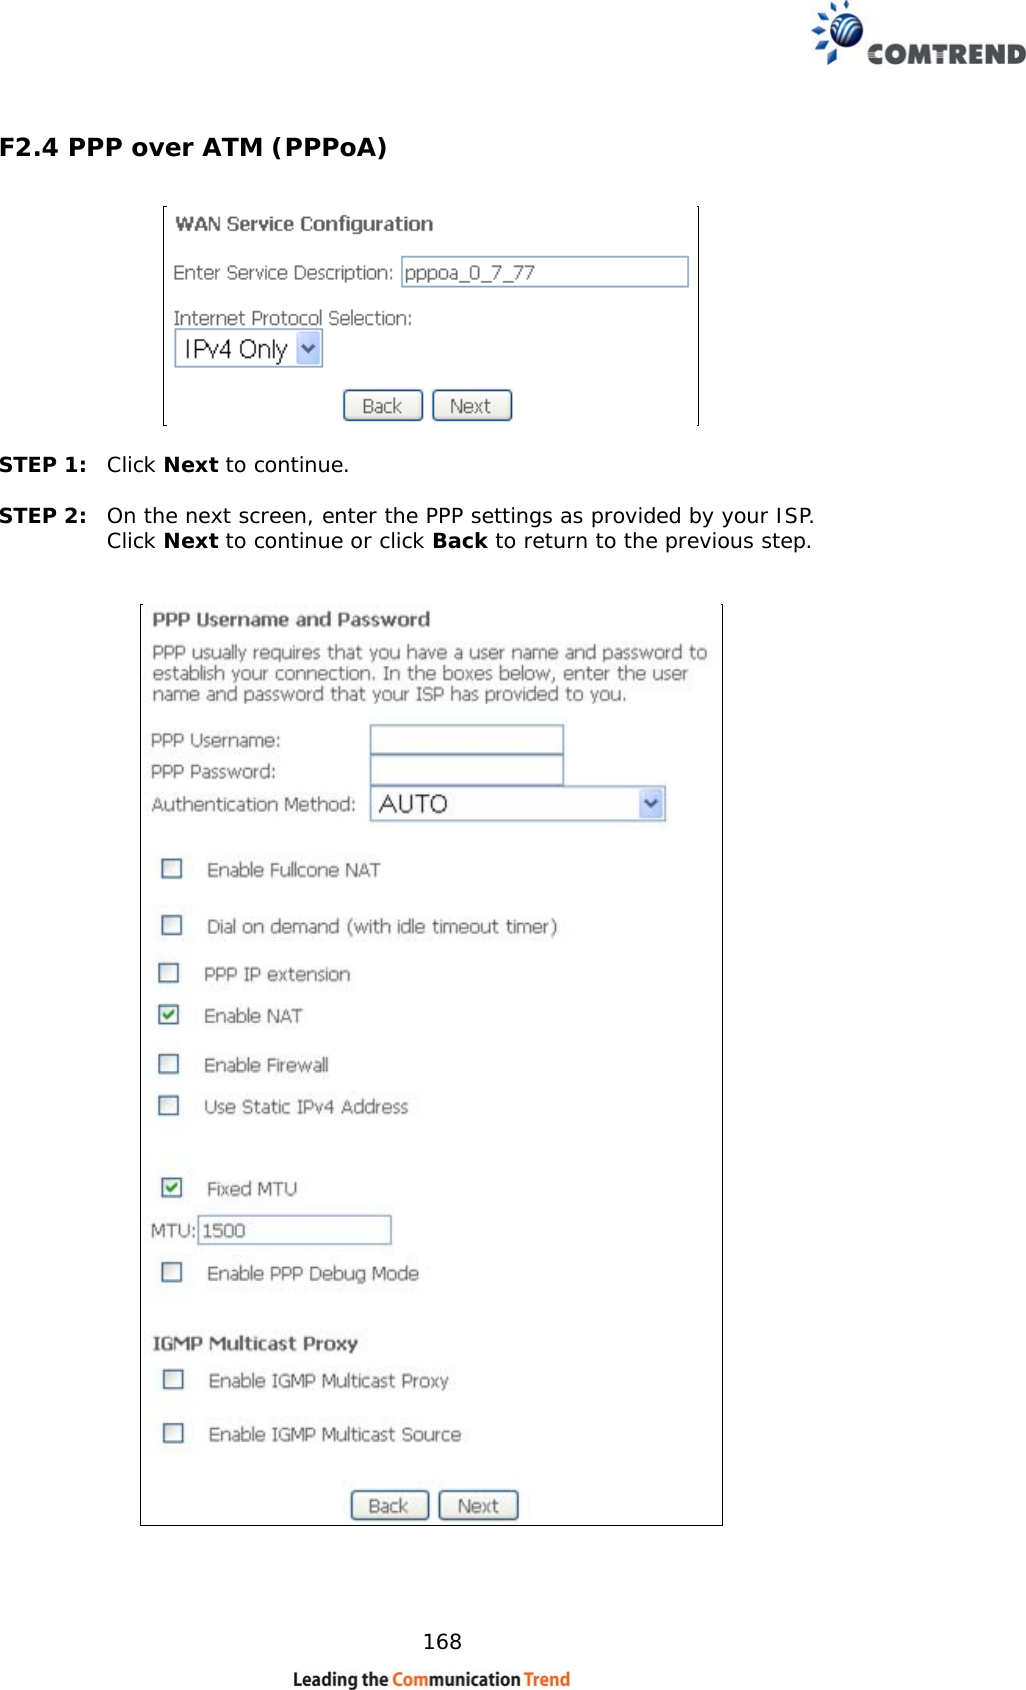    168 F2.4 PPP over ATM (PPPoA)    STEP 1:  Click Next to continue.   STEP 2:  On the next screen, enter the PPP settings as provided by your ISP.  Click Next to continue or click Back to return to the previous step.       